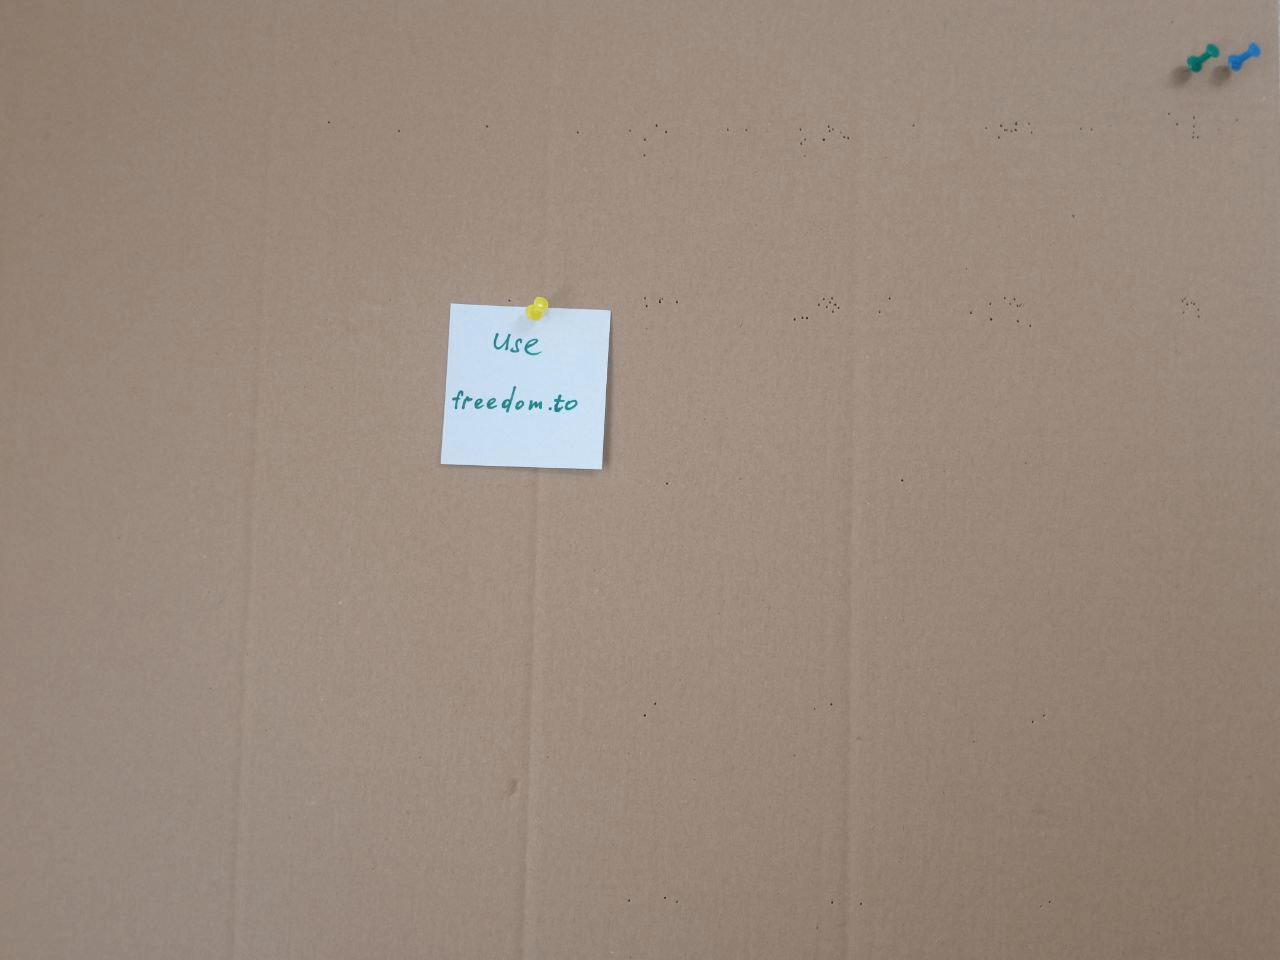 A sticky note pinned to a piece of cardboard that says “Use freedom.to”